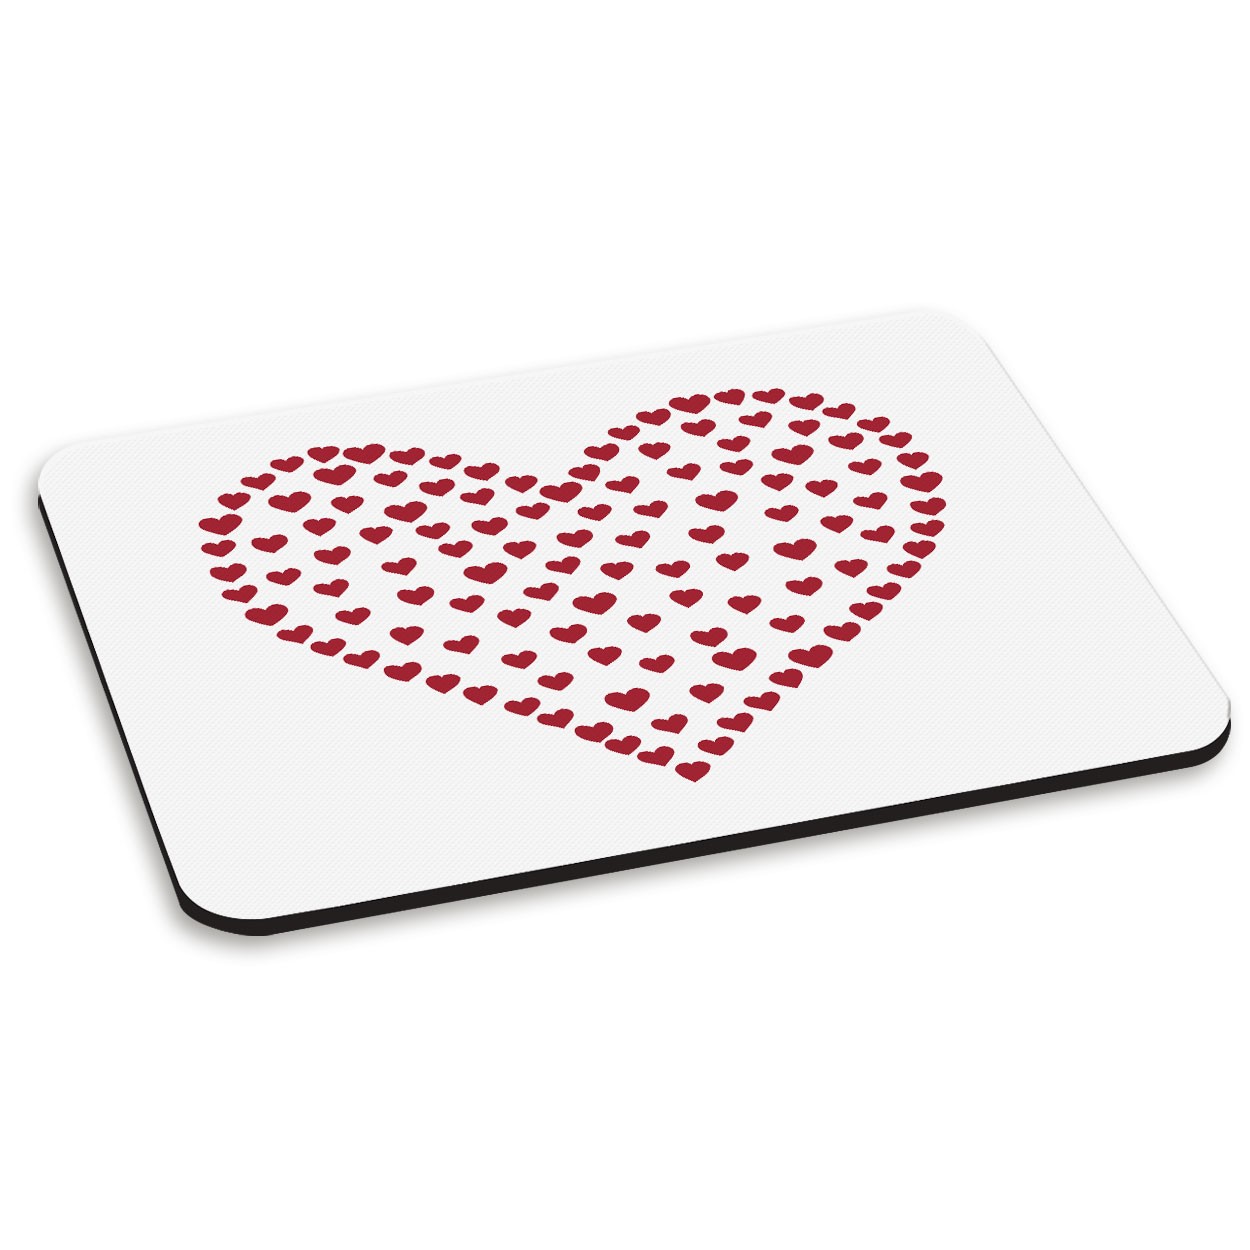 Heart Of Hearts PC Computer Mouse Mat Pad